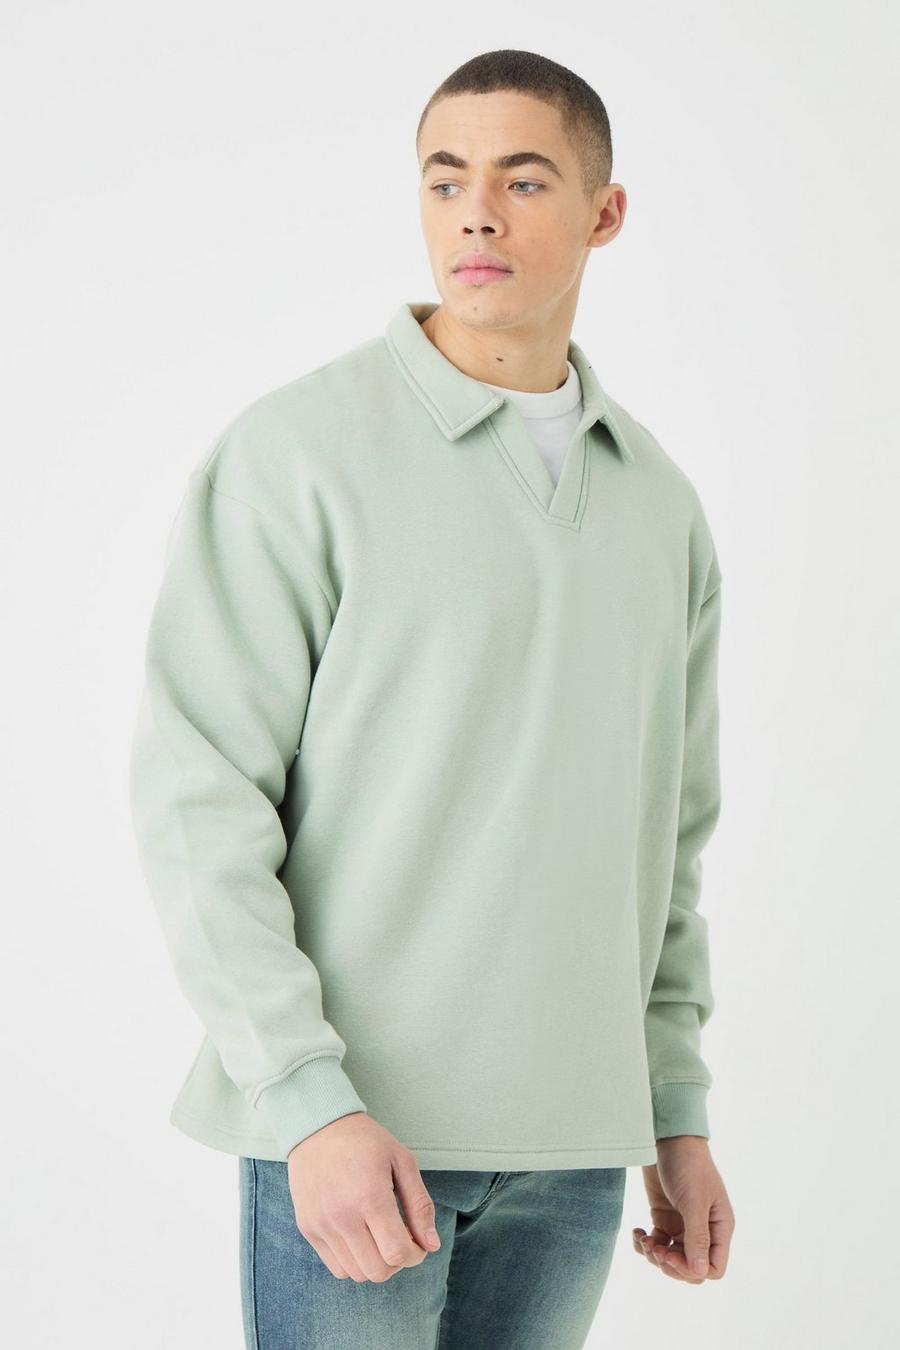 Sage green Oversized Revere Rugby Sweatshirt Polo